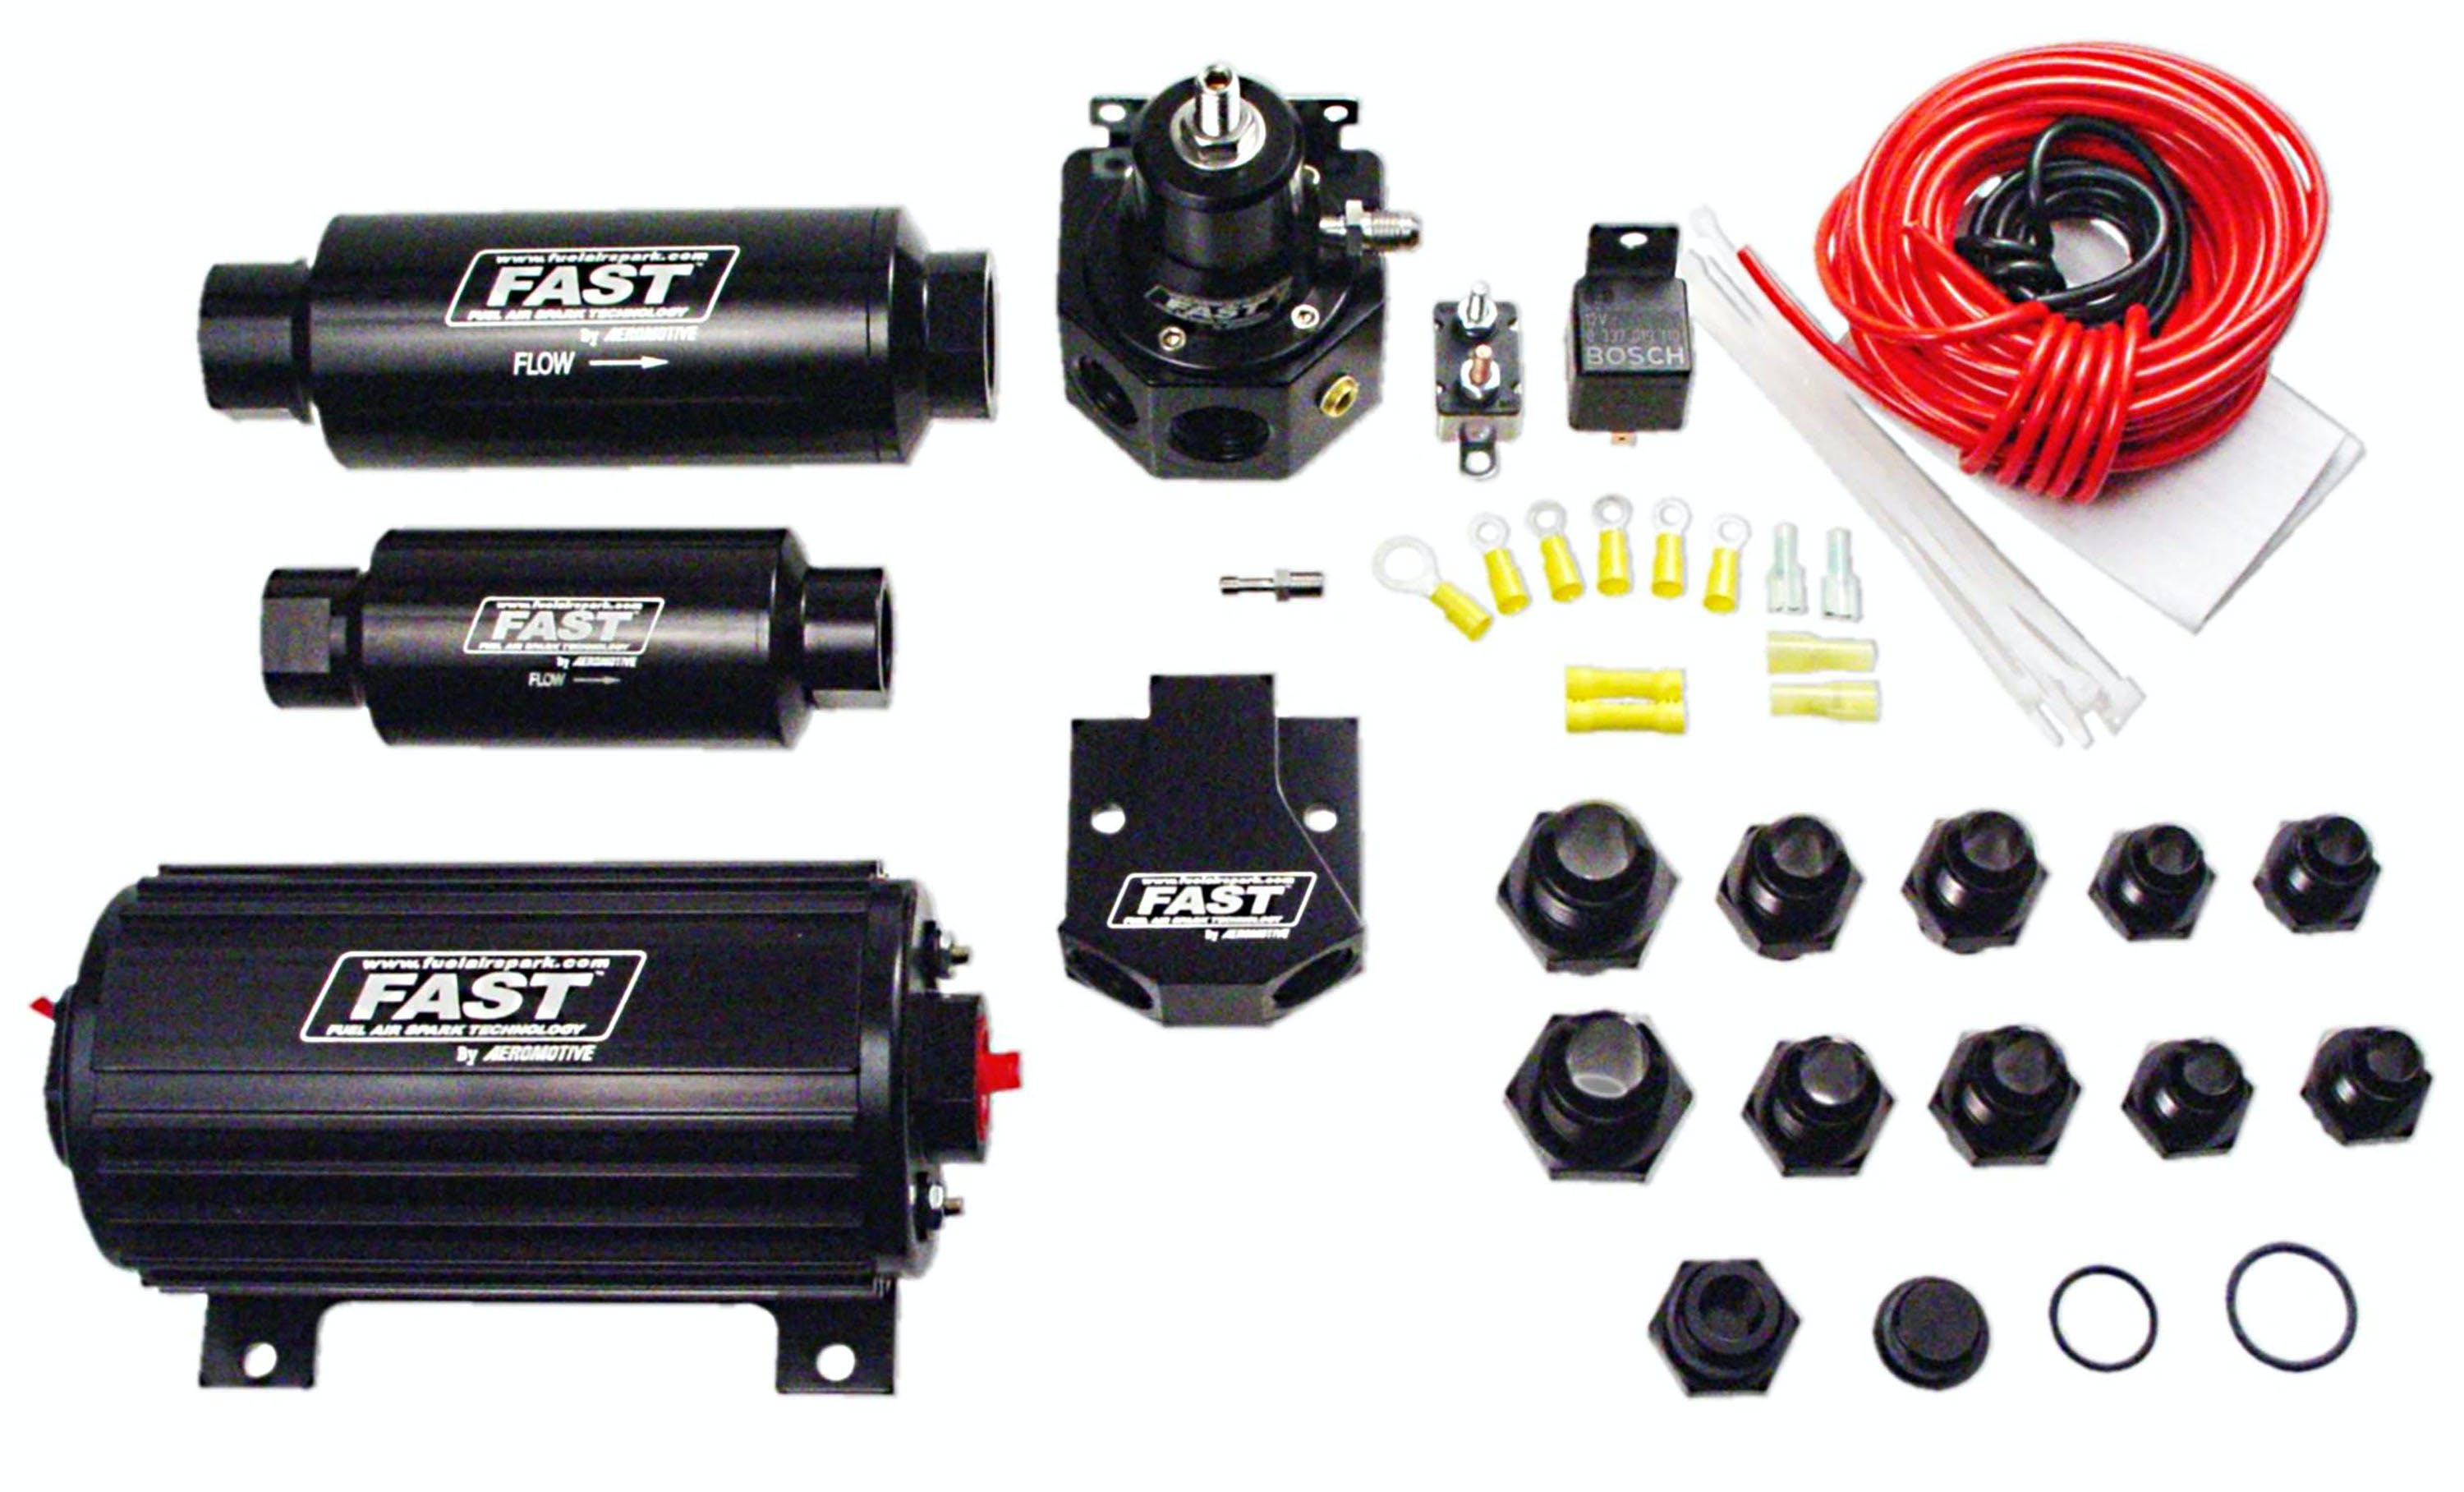 FAST - Fuel Air Spark Technology 307501 Inline Race Fuel System